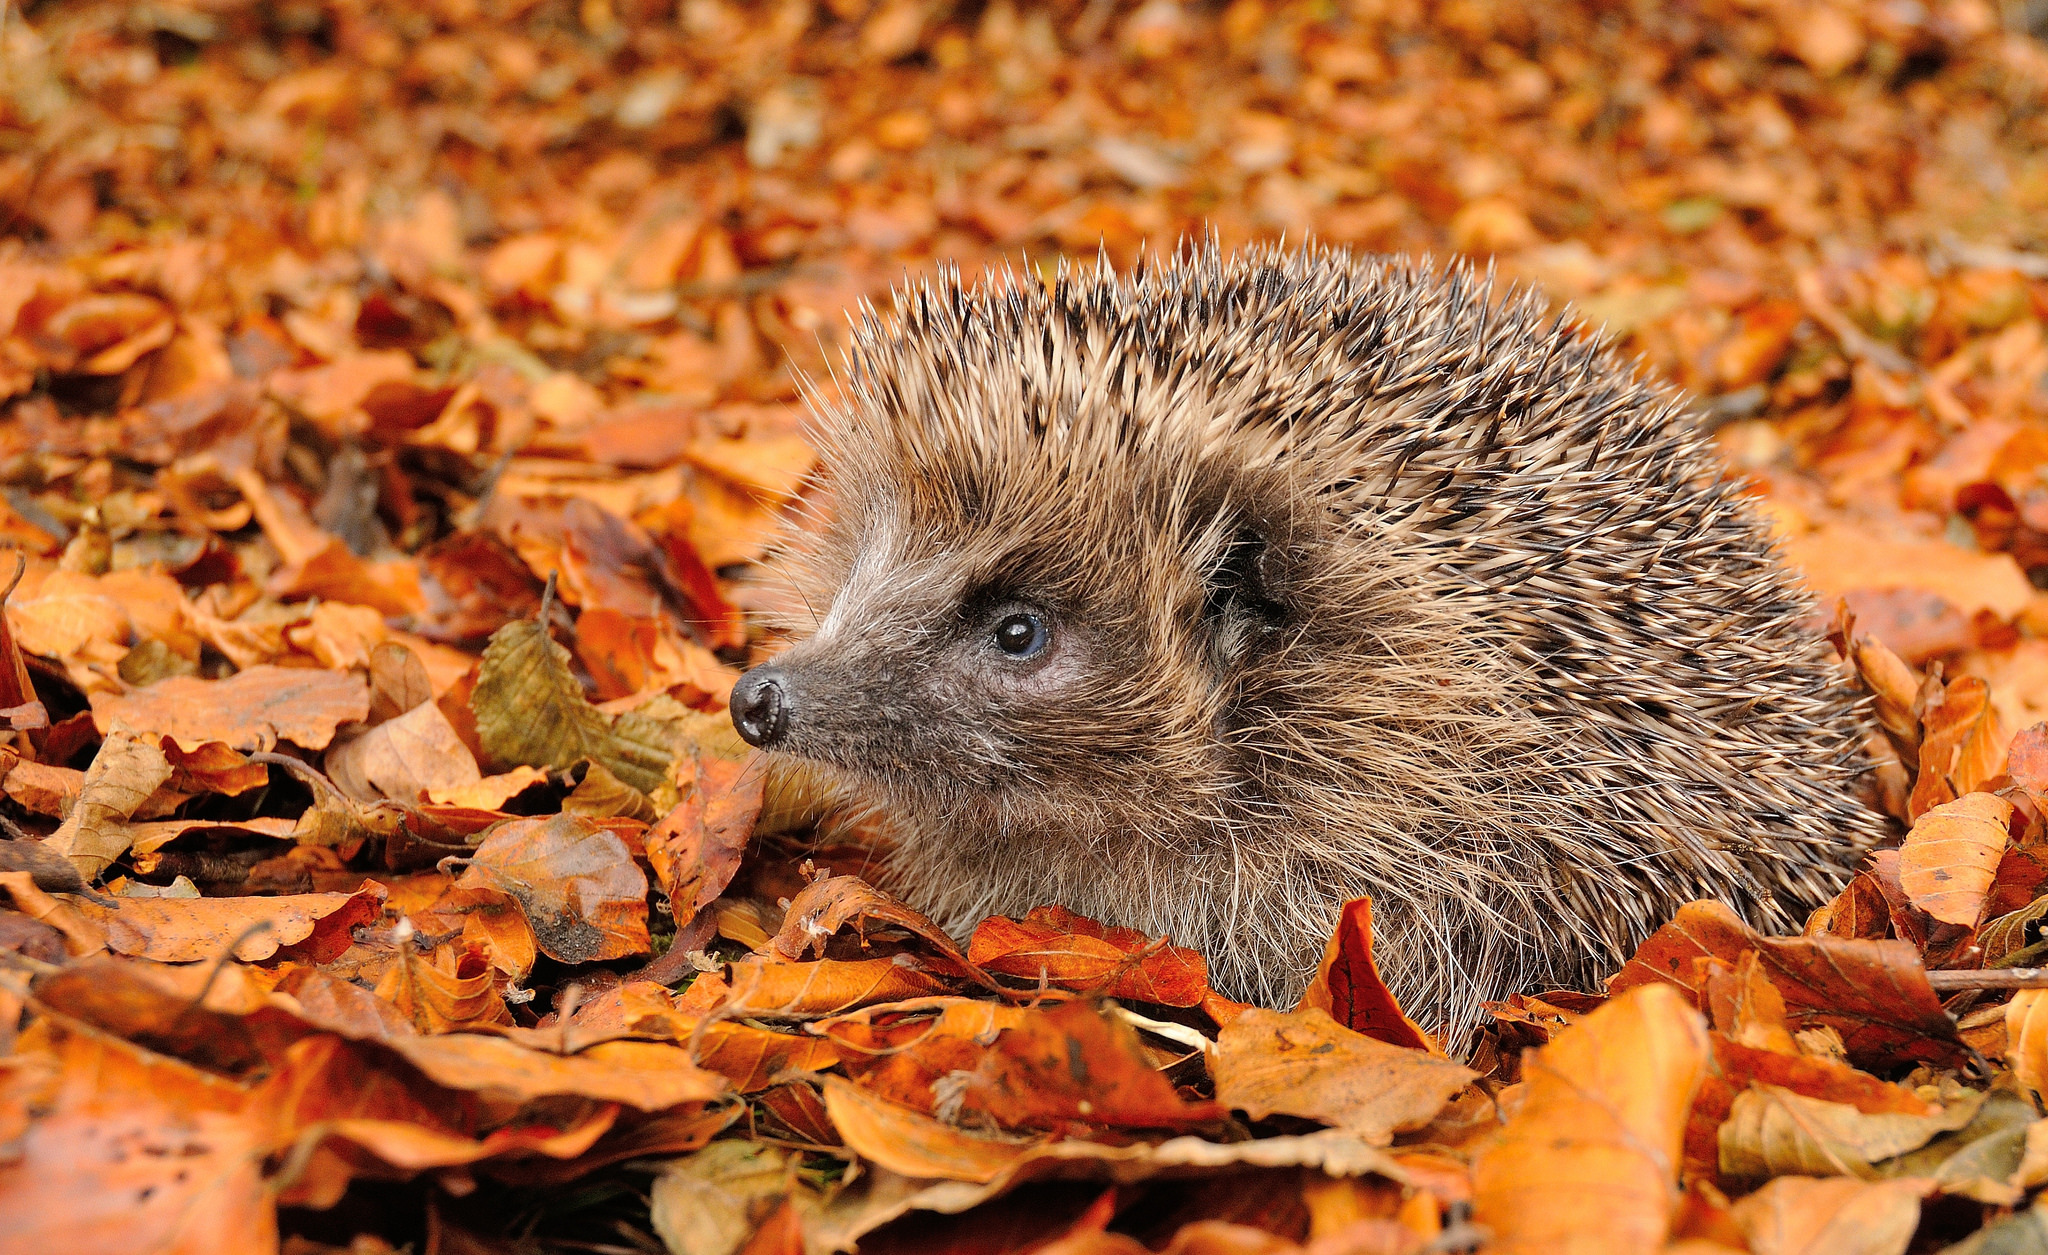 Hedgehog Wallpapers, Pictures, Images